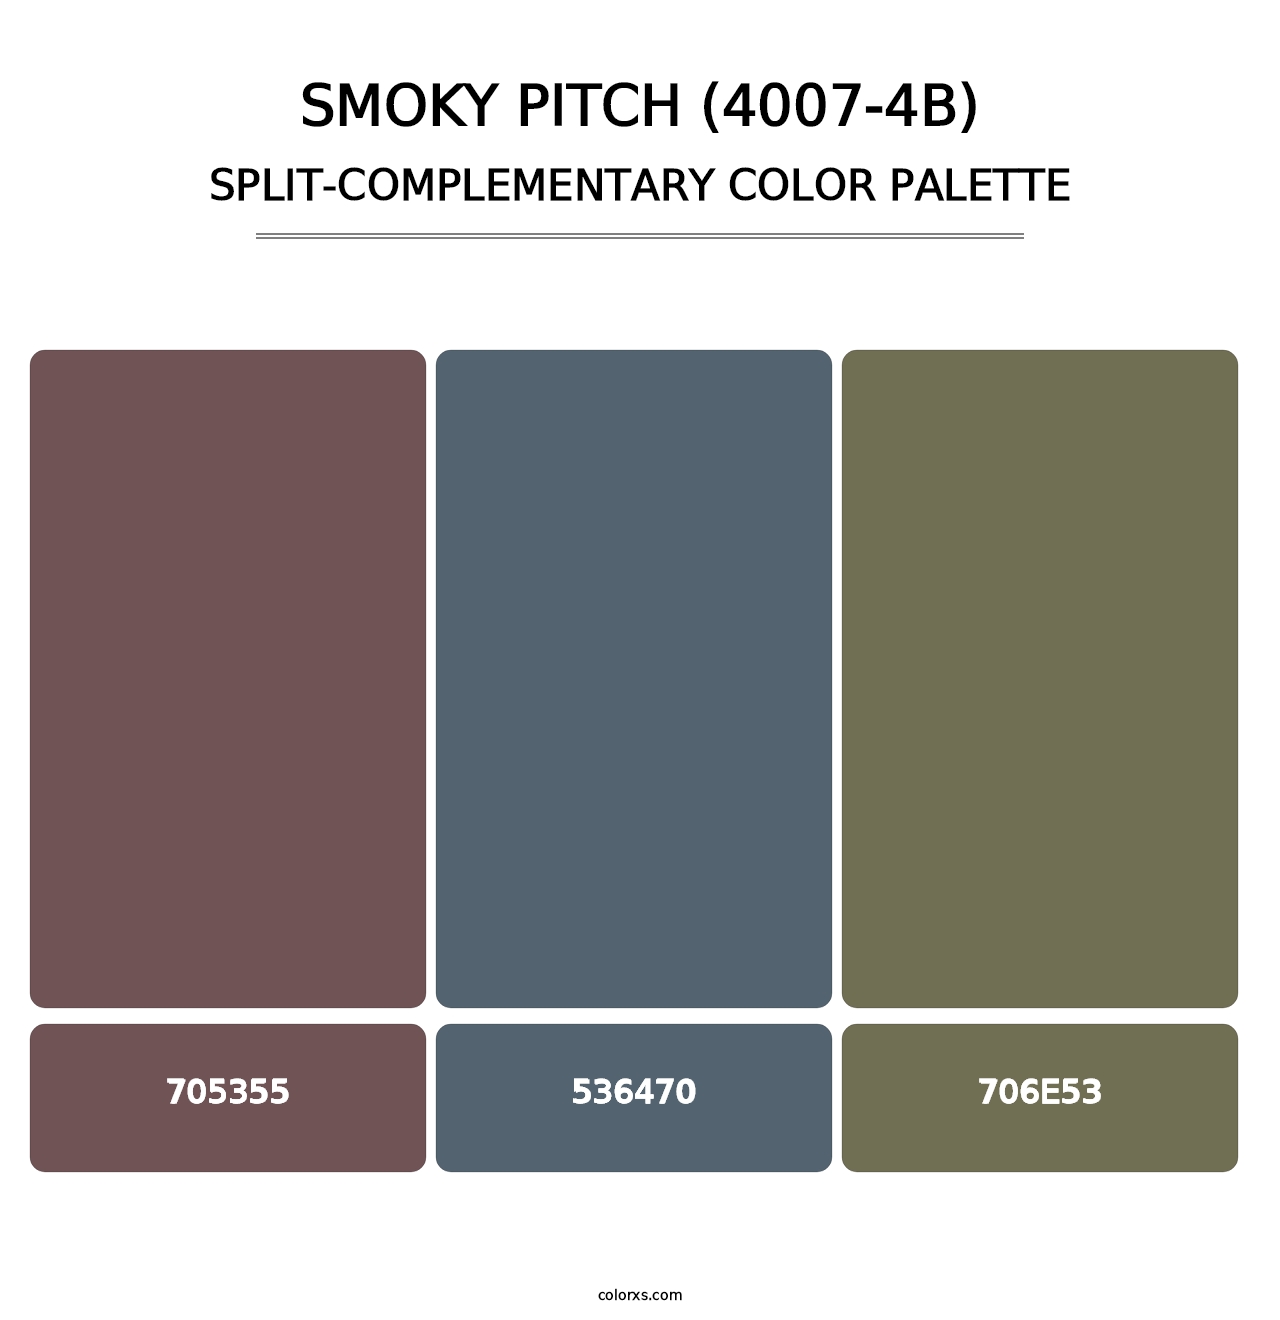 Smoky Pitch (4007-4B) - Split-Complementary Color Palette